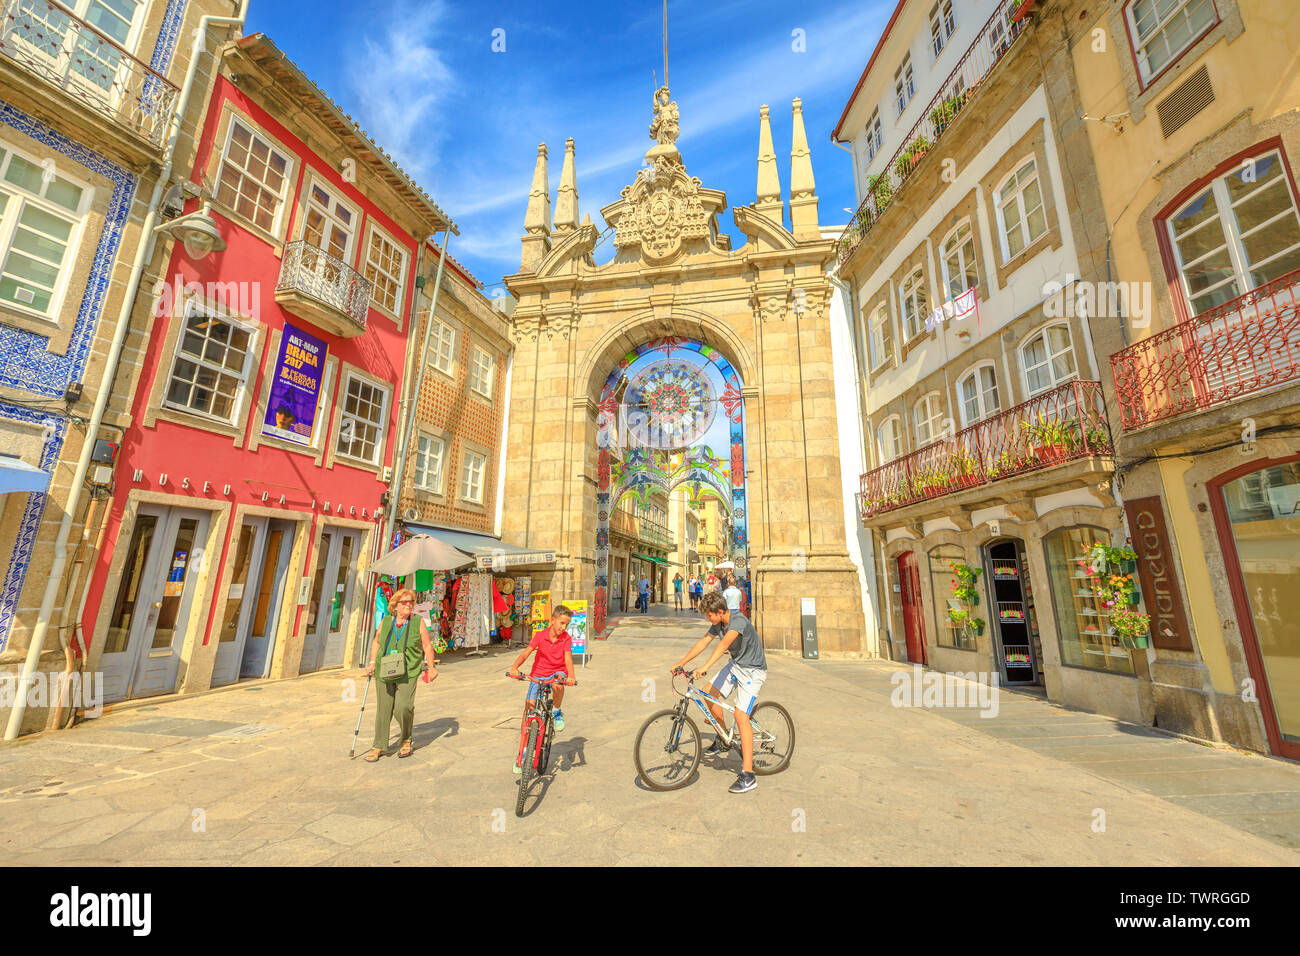 Braga, Portugal - August 12, 2017: children cycling in front of popular Arco da Porta Nova. Arch of New Gate in Baroque style is part of Braga city Stock Photo